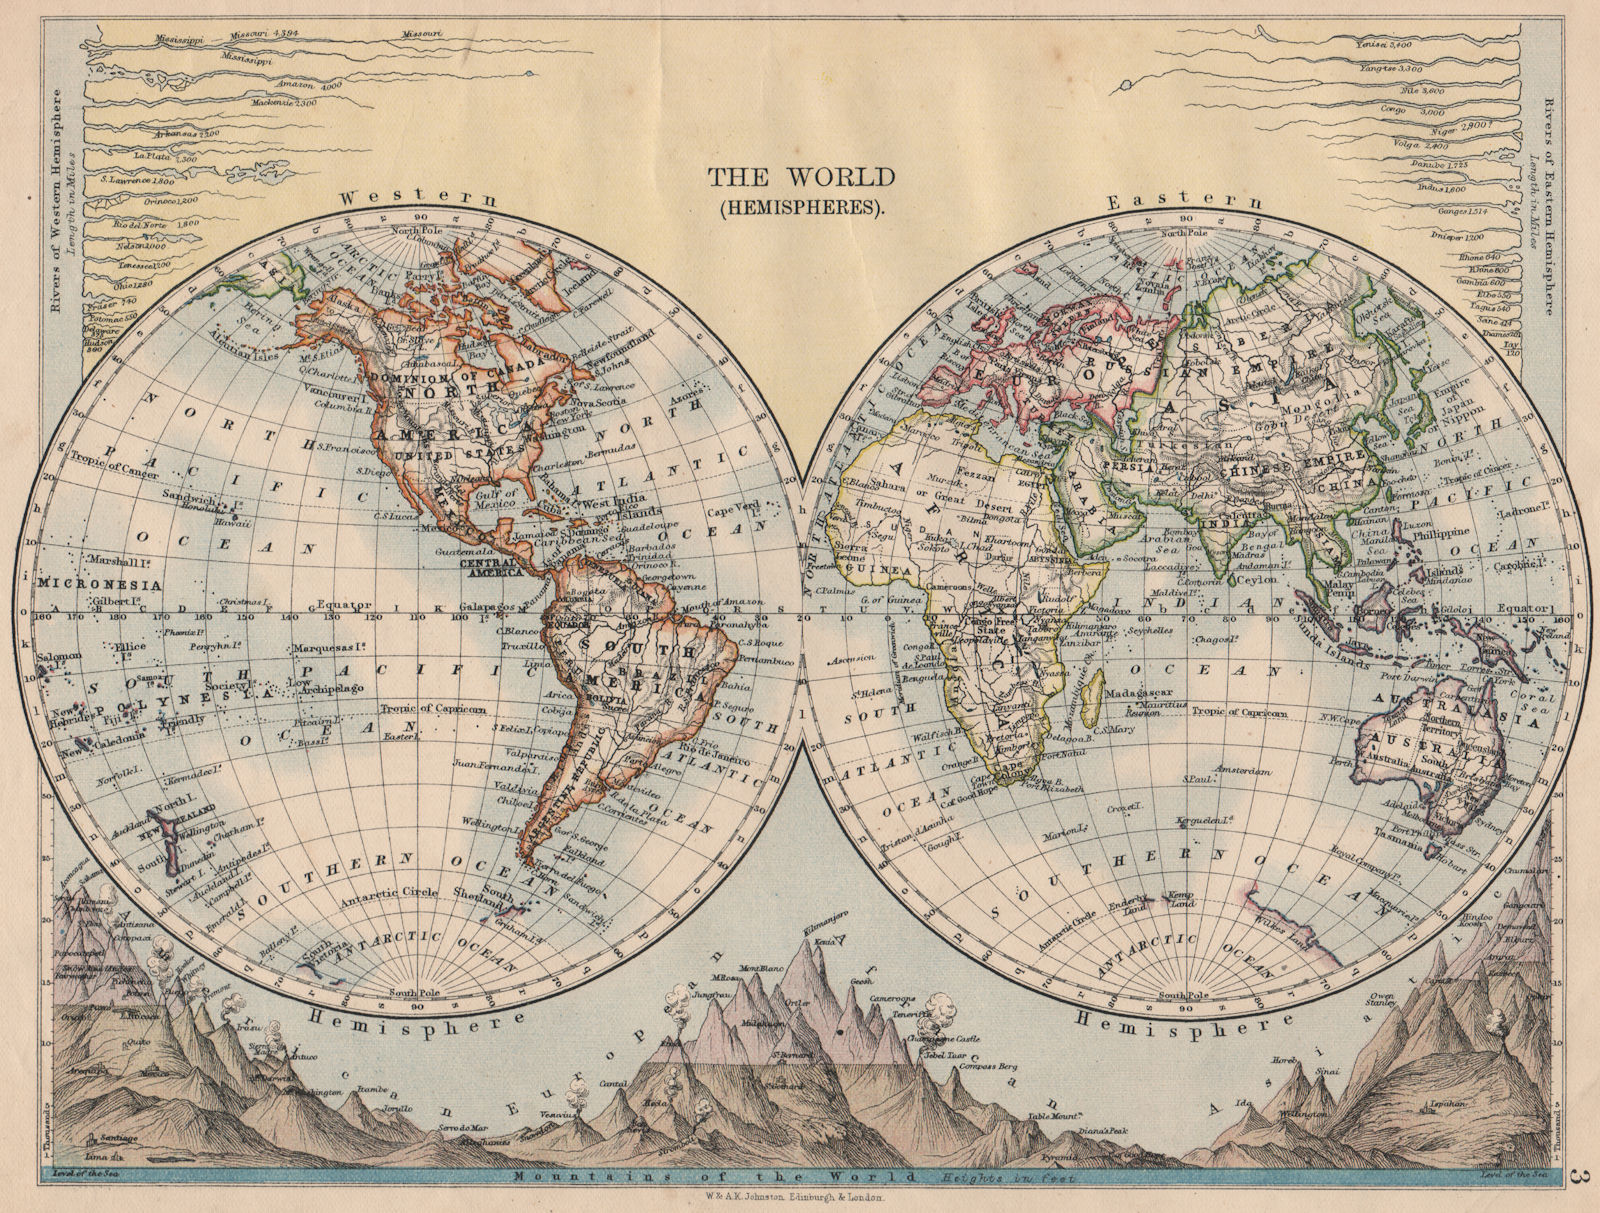 Associate Product WORLD TWIN HEMISPHERES. Relief. Mountains. Rivers.  JOHNSTON 1895 old map